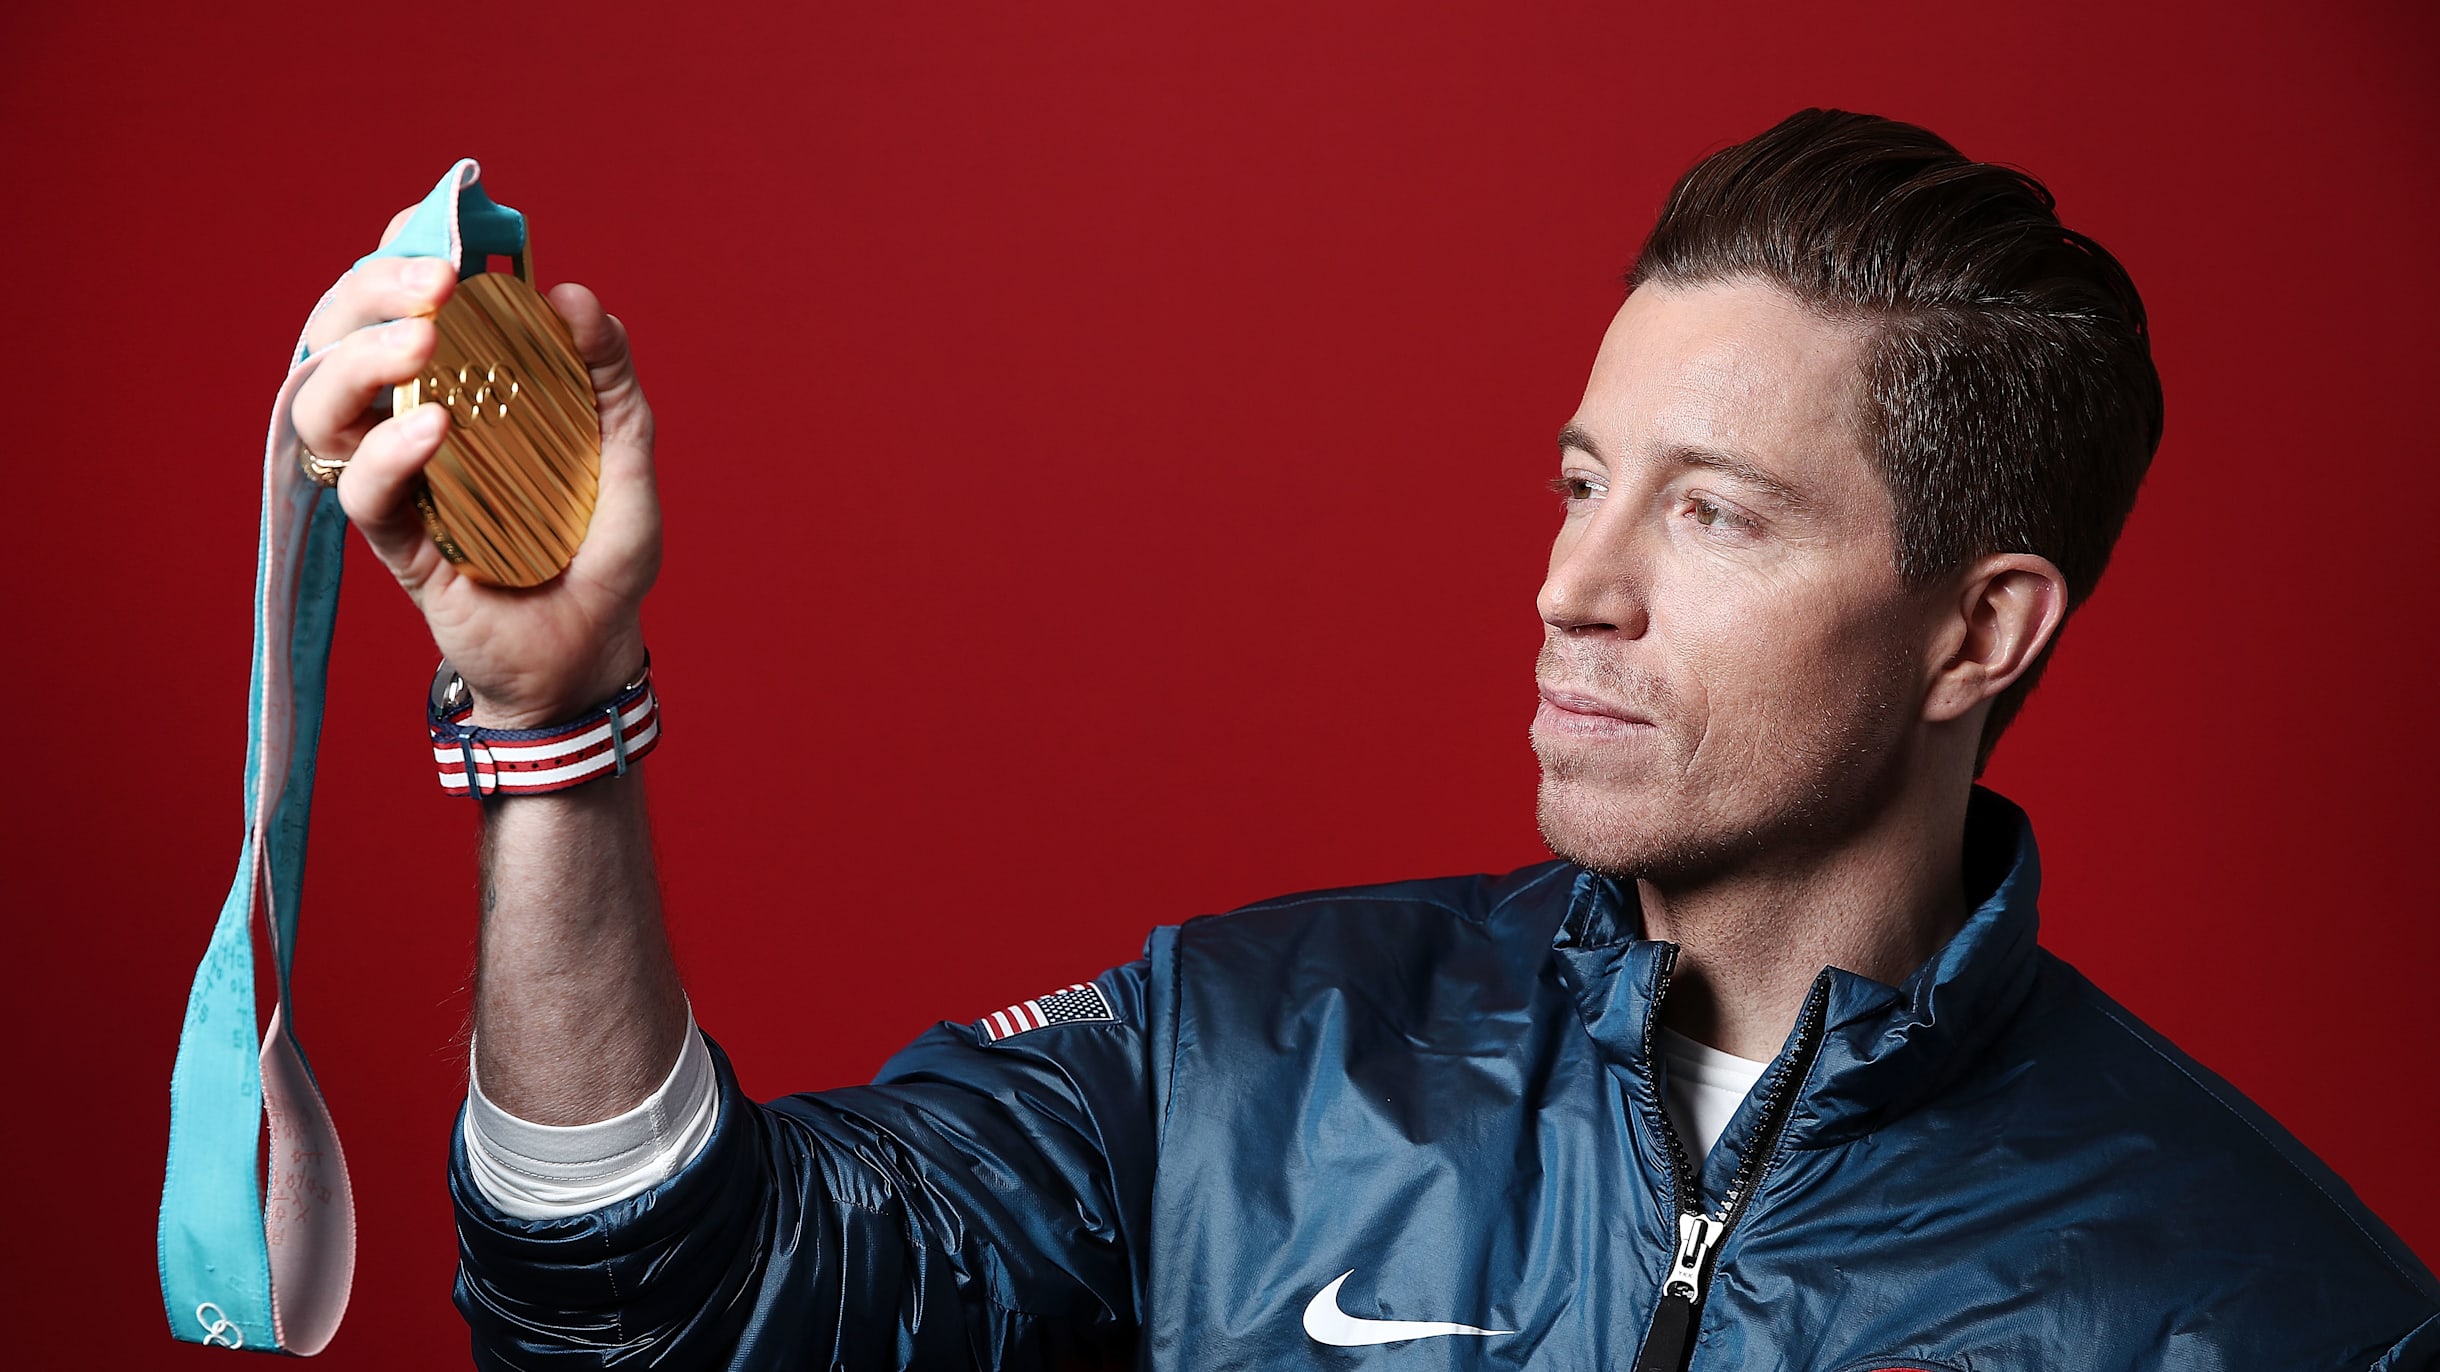 Gold medal Olympian Shaun White shares his 8 travel must-haves